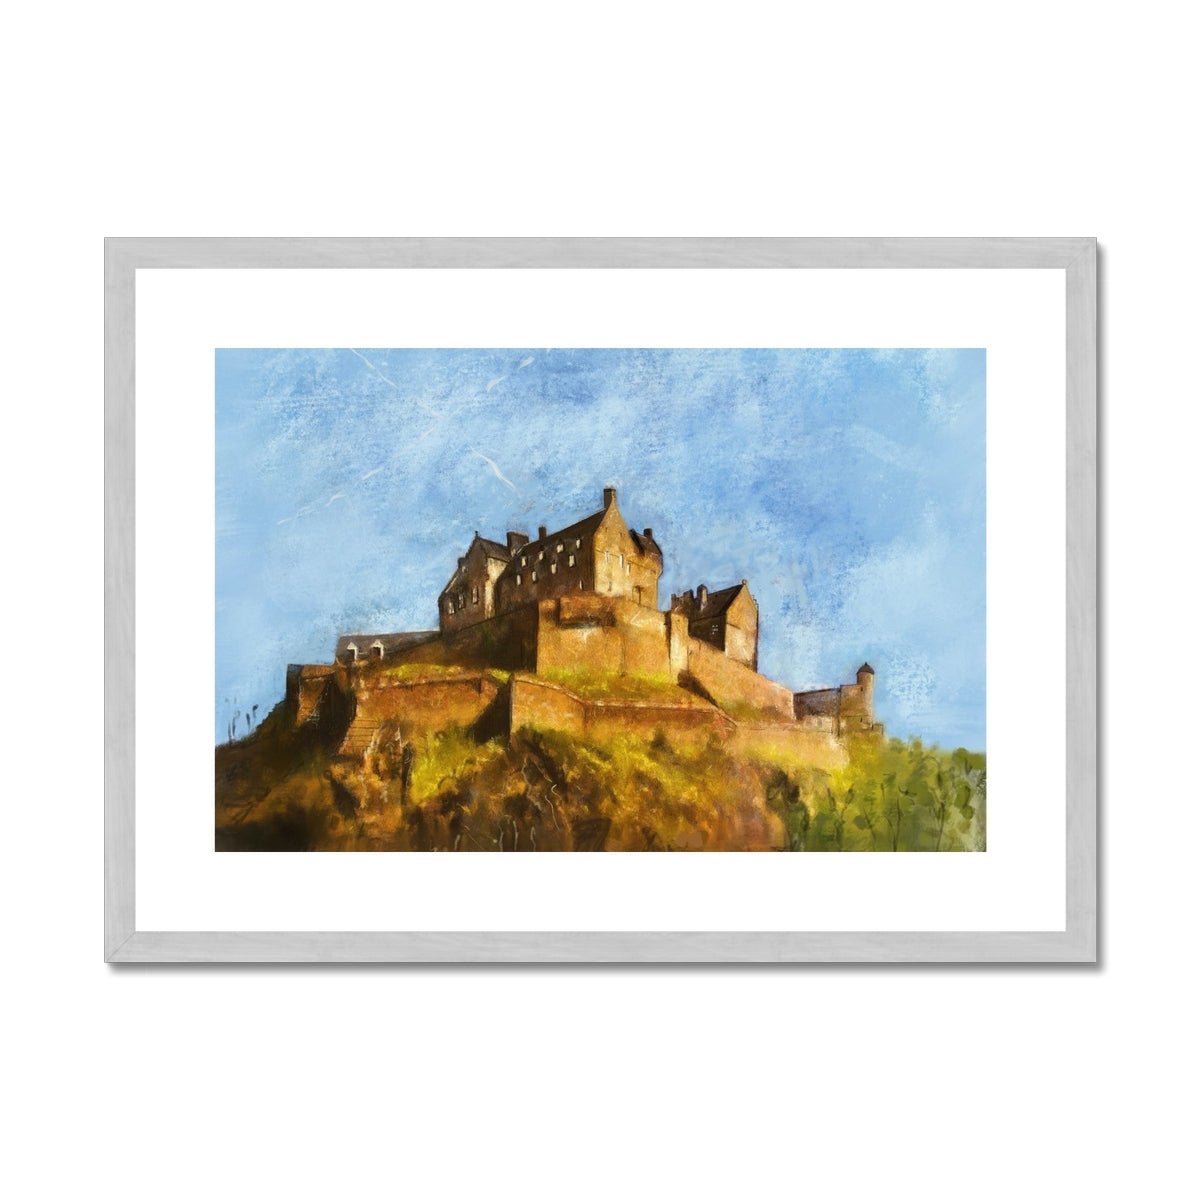 Edinburgh Castle Painting | Antique Framed & Mounted Prints From Scotland-Antique Framed & Mounted Prints-Historic & Iconic Scotland Art Gallery-A2 Landscape-Silver Frame-Paintings, Prints, Homeware, Art Gifts From Scotland By Scottish Artist Kevin Hunter